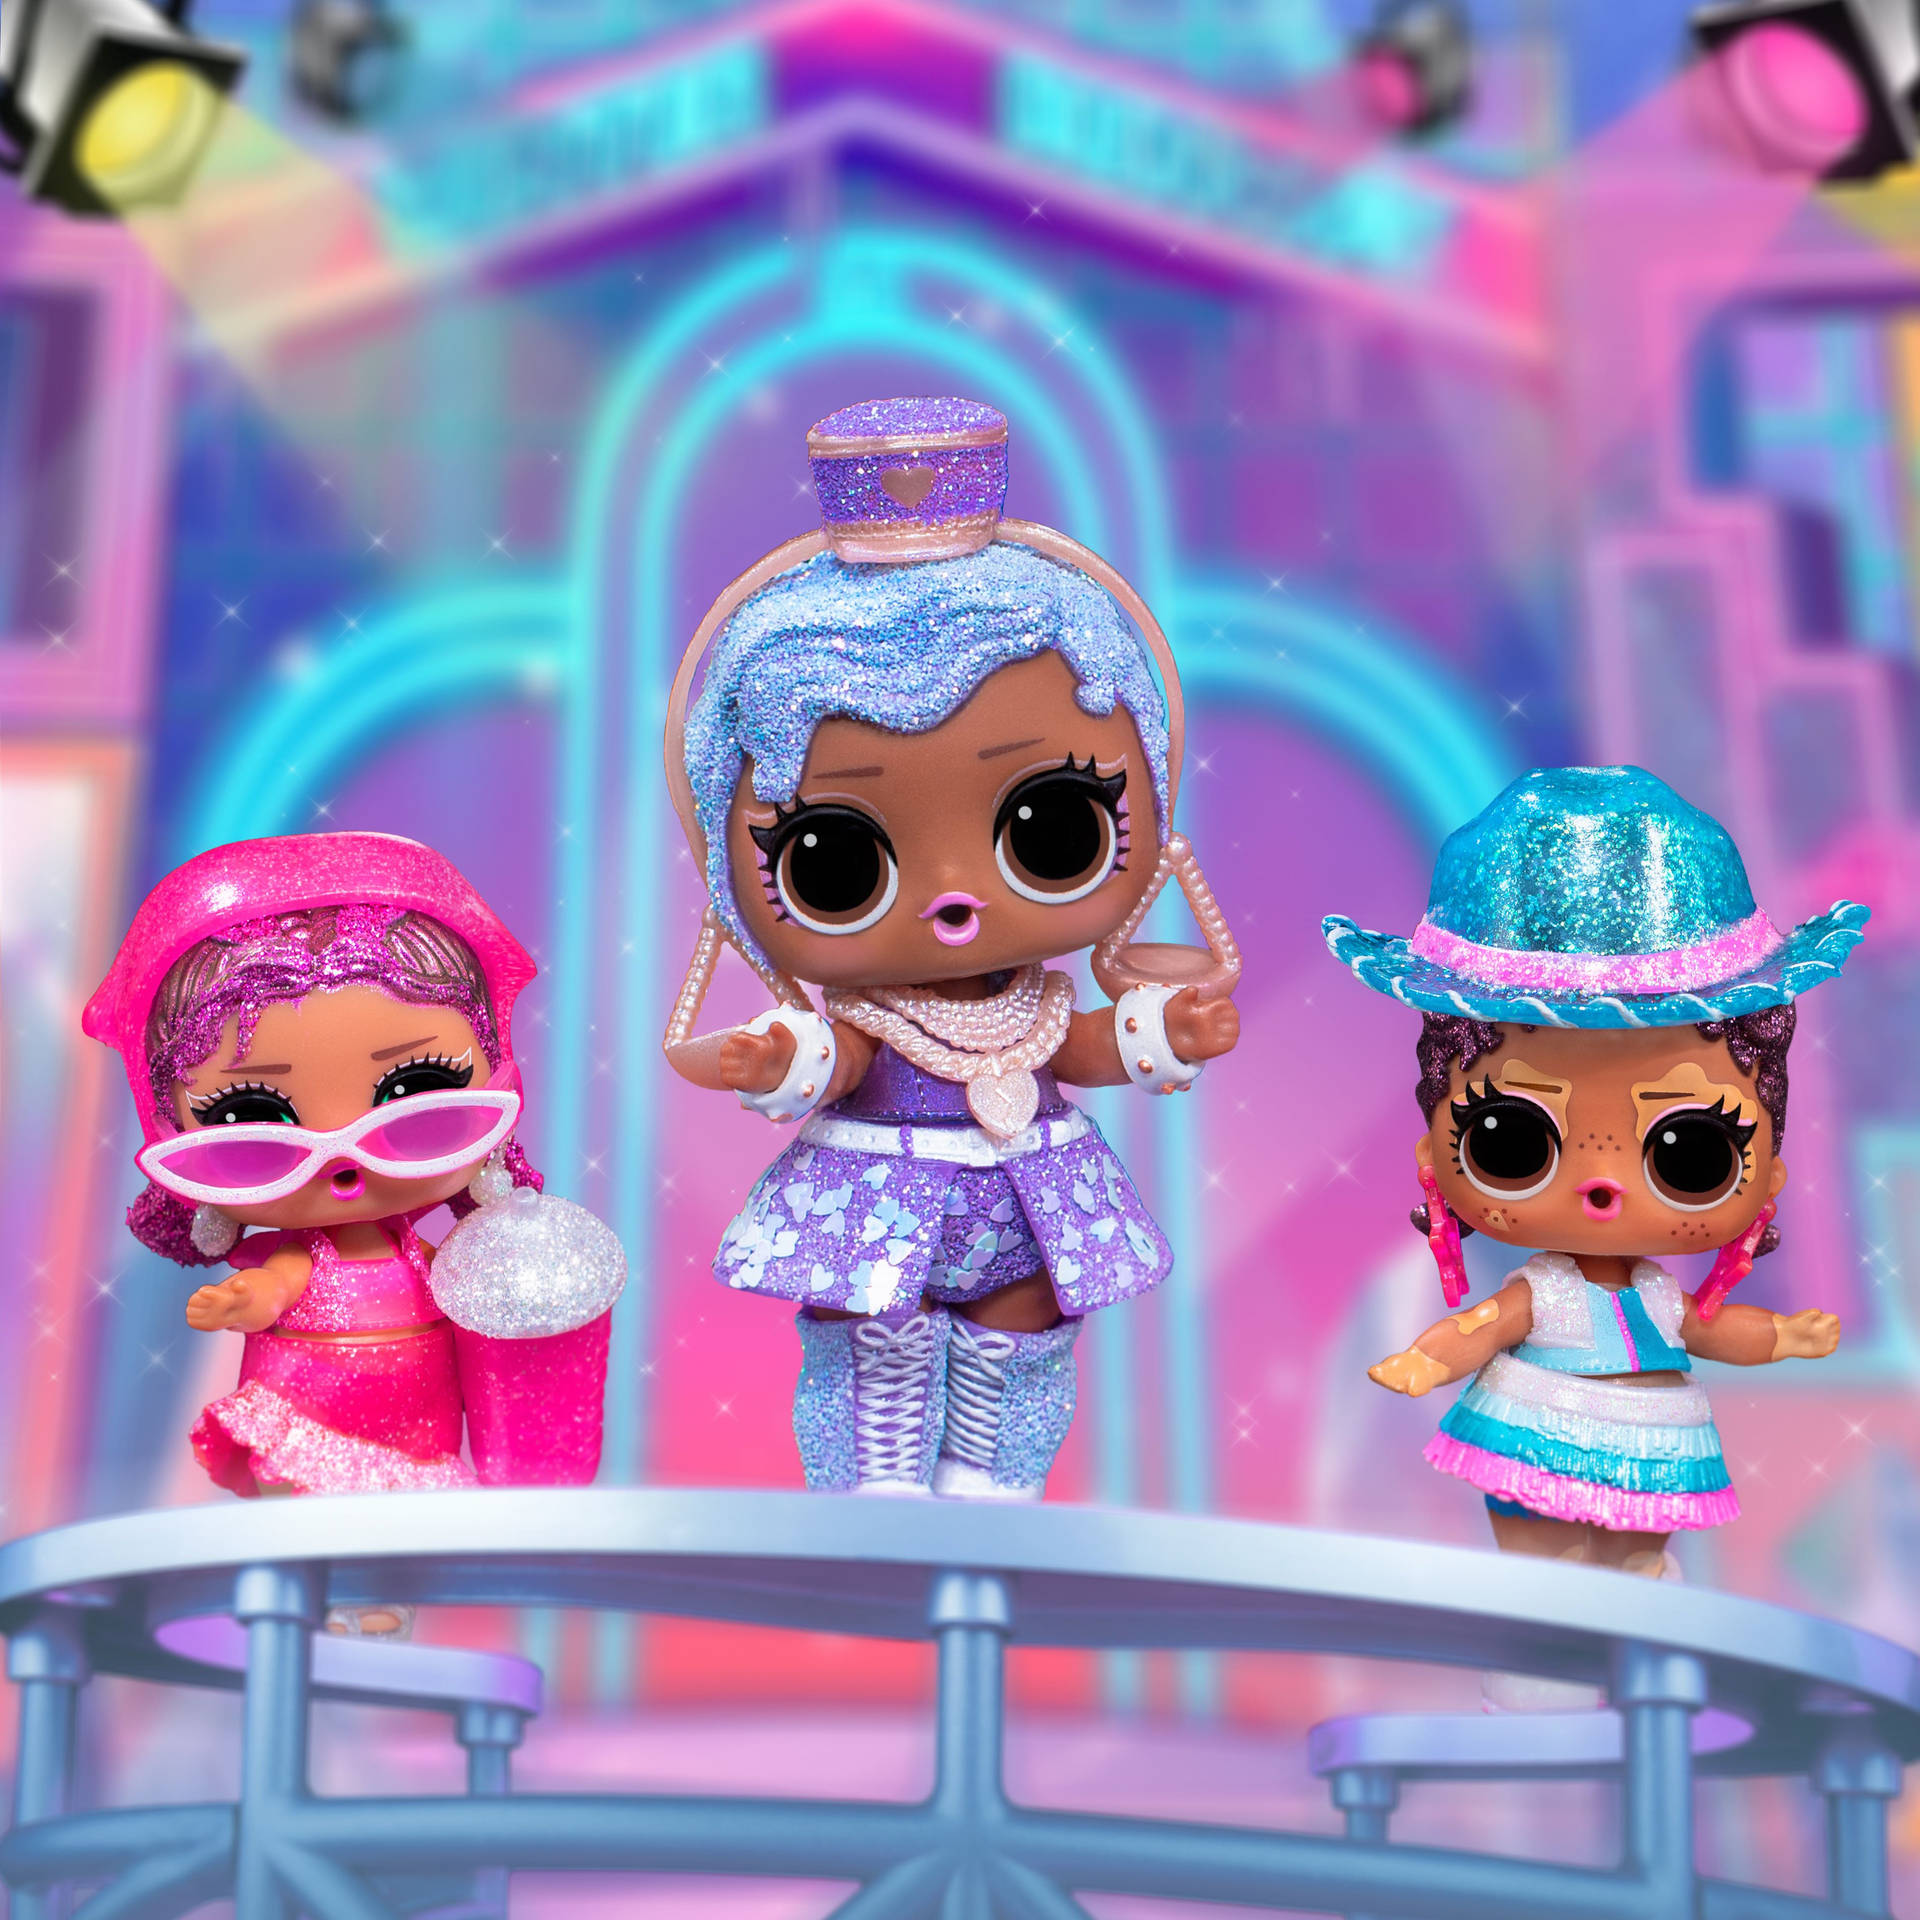 The L.o.l. Surprise Dolls Offer Endless Fun And Surprise!